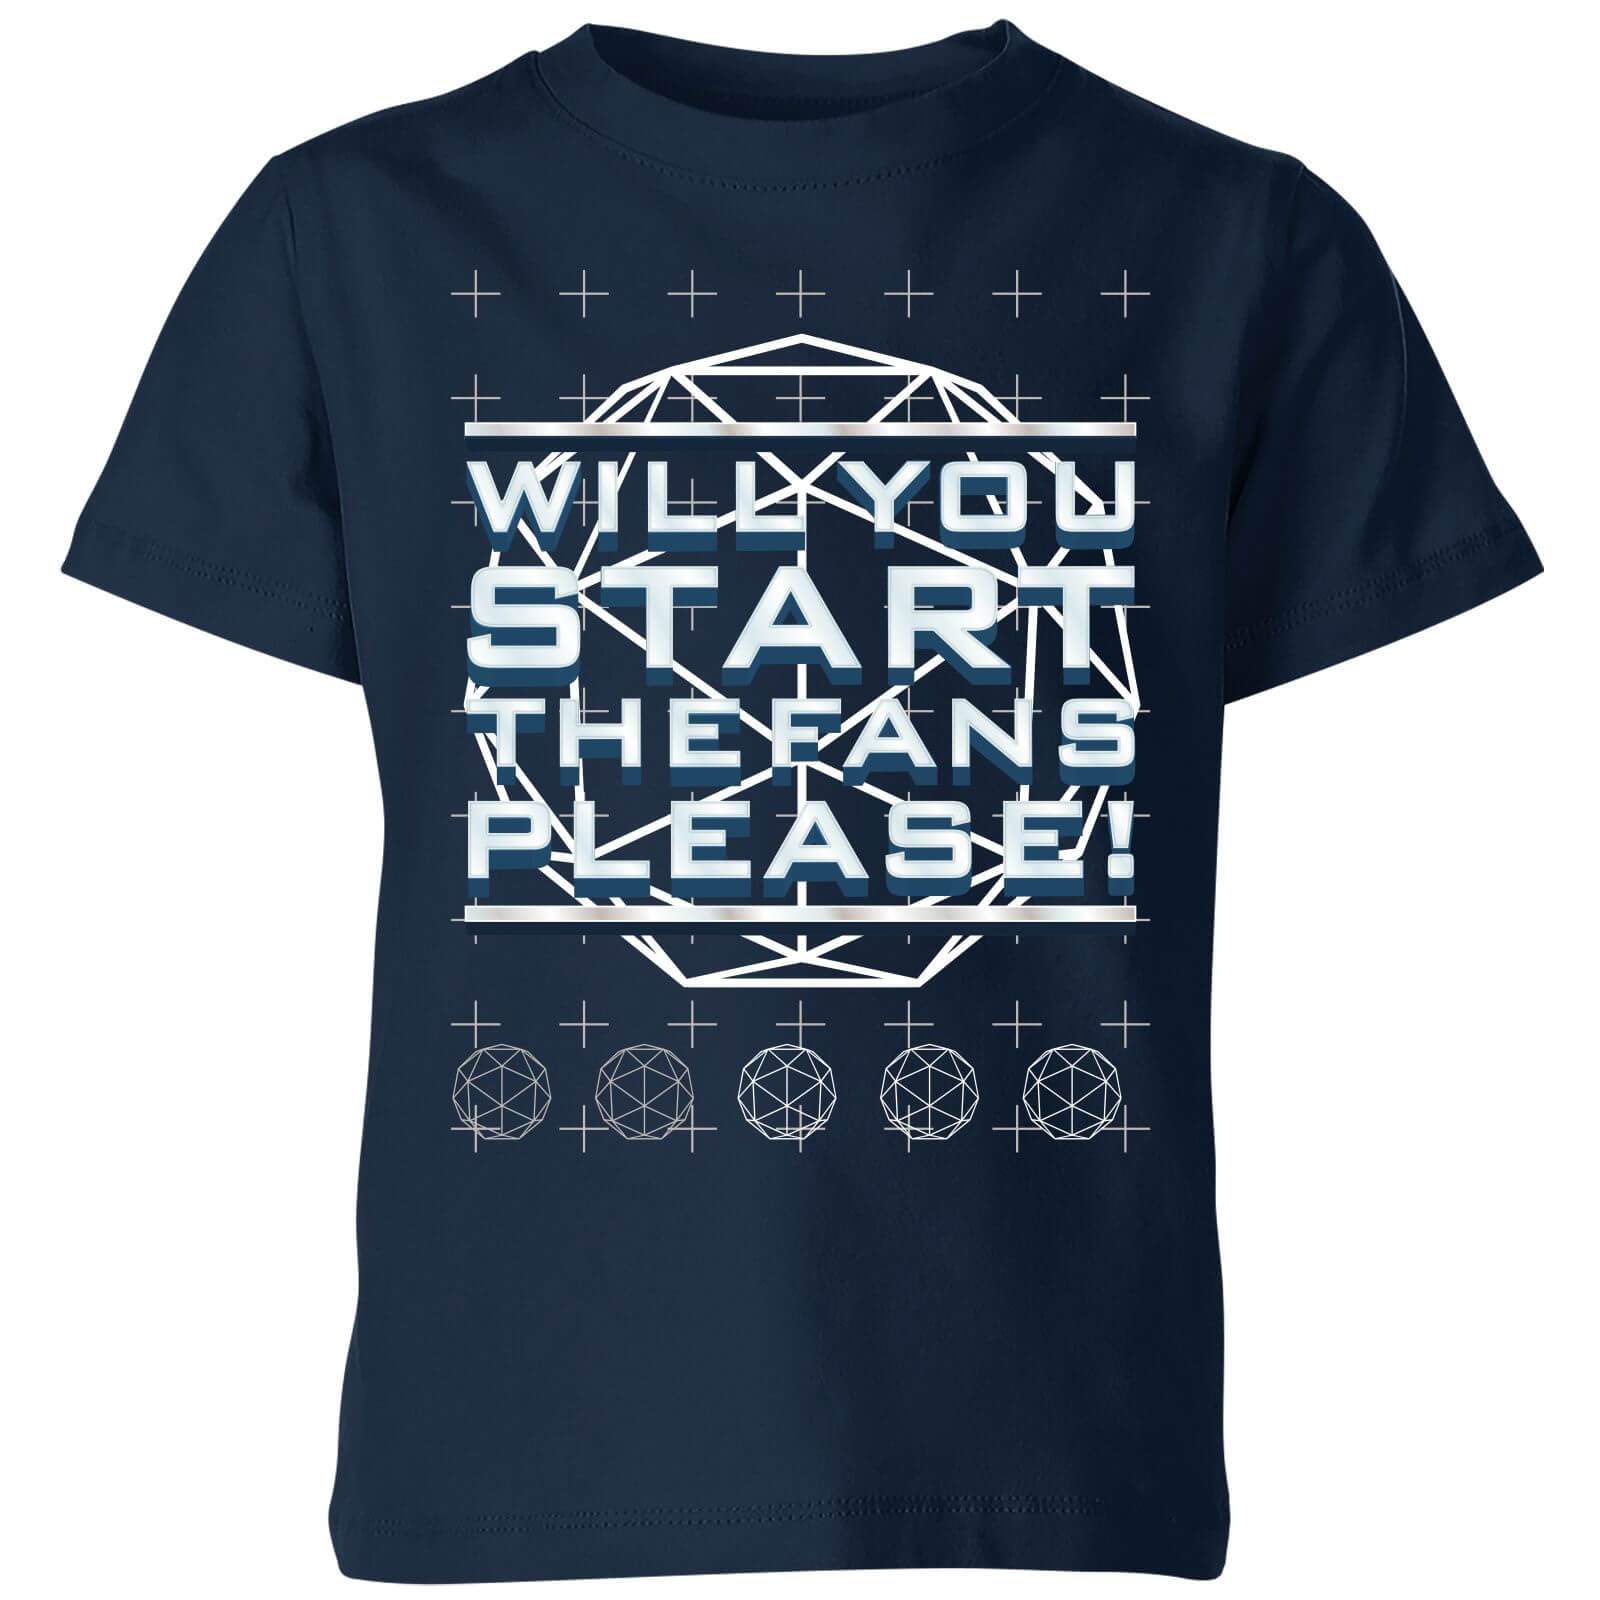 Crystal Maze Will You Start The Fans Please! Kids' T-Shirt - Navy - 3-4 Years - Navy